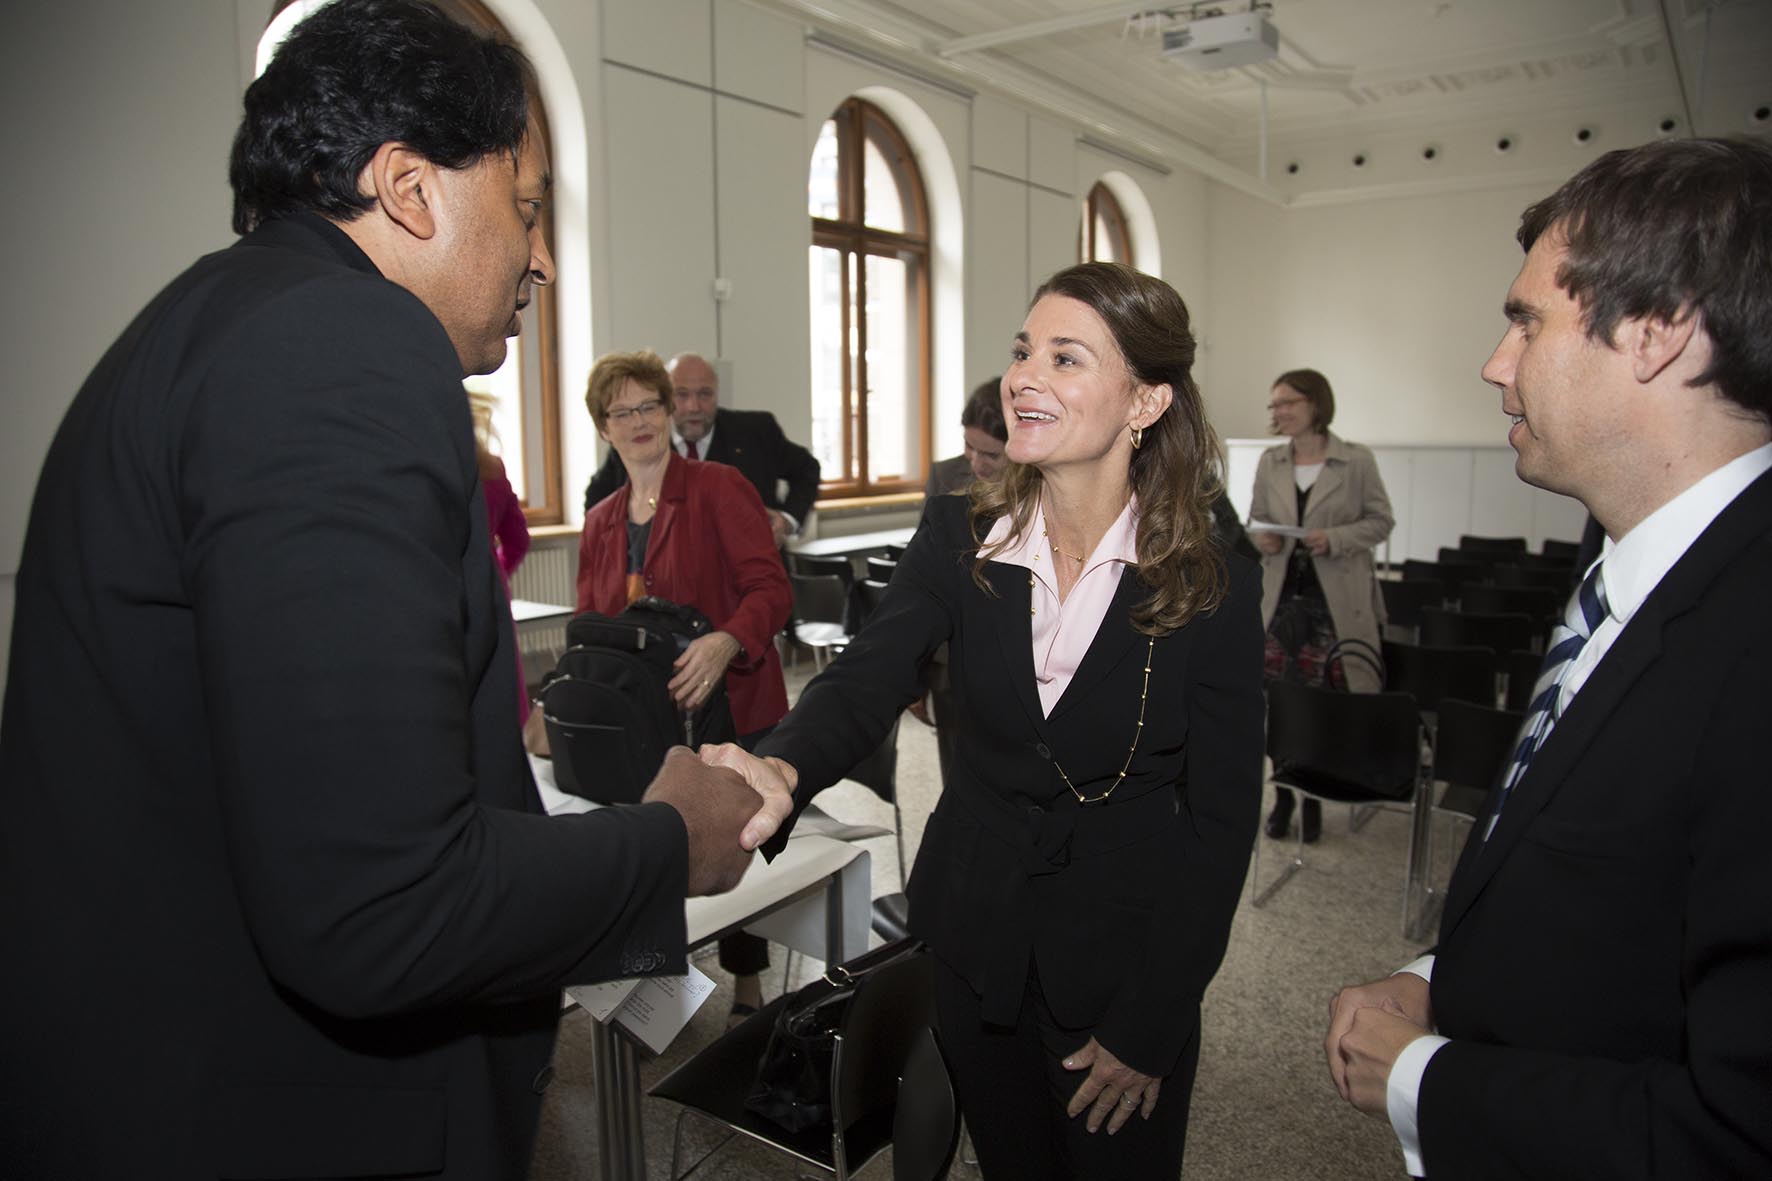  Melinda Gates meets delegates before ONE Germany’s “Ich Schaue Hin” Campaign.&nbsp; For the Bill &amp; Melinda Gates Foundation.  